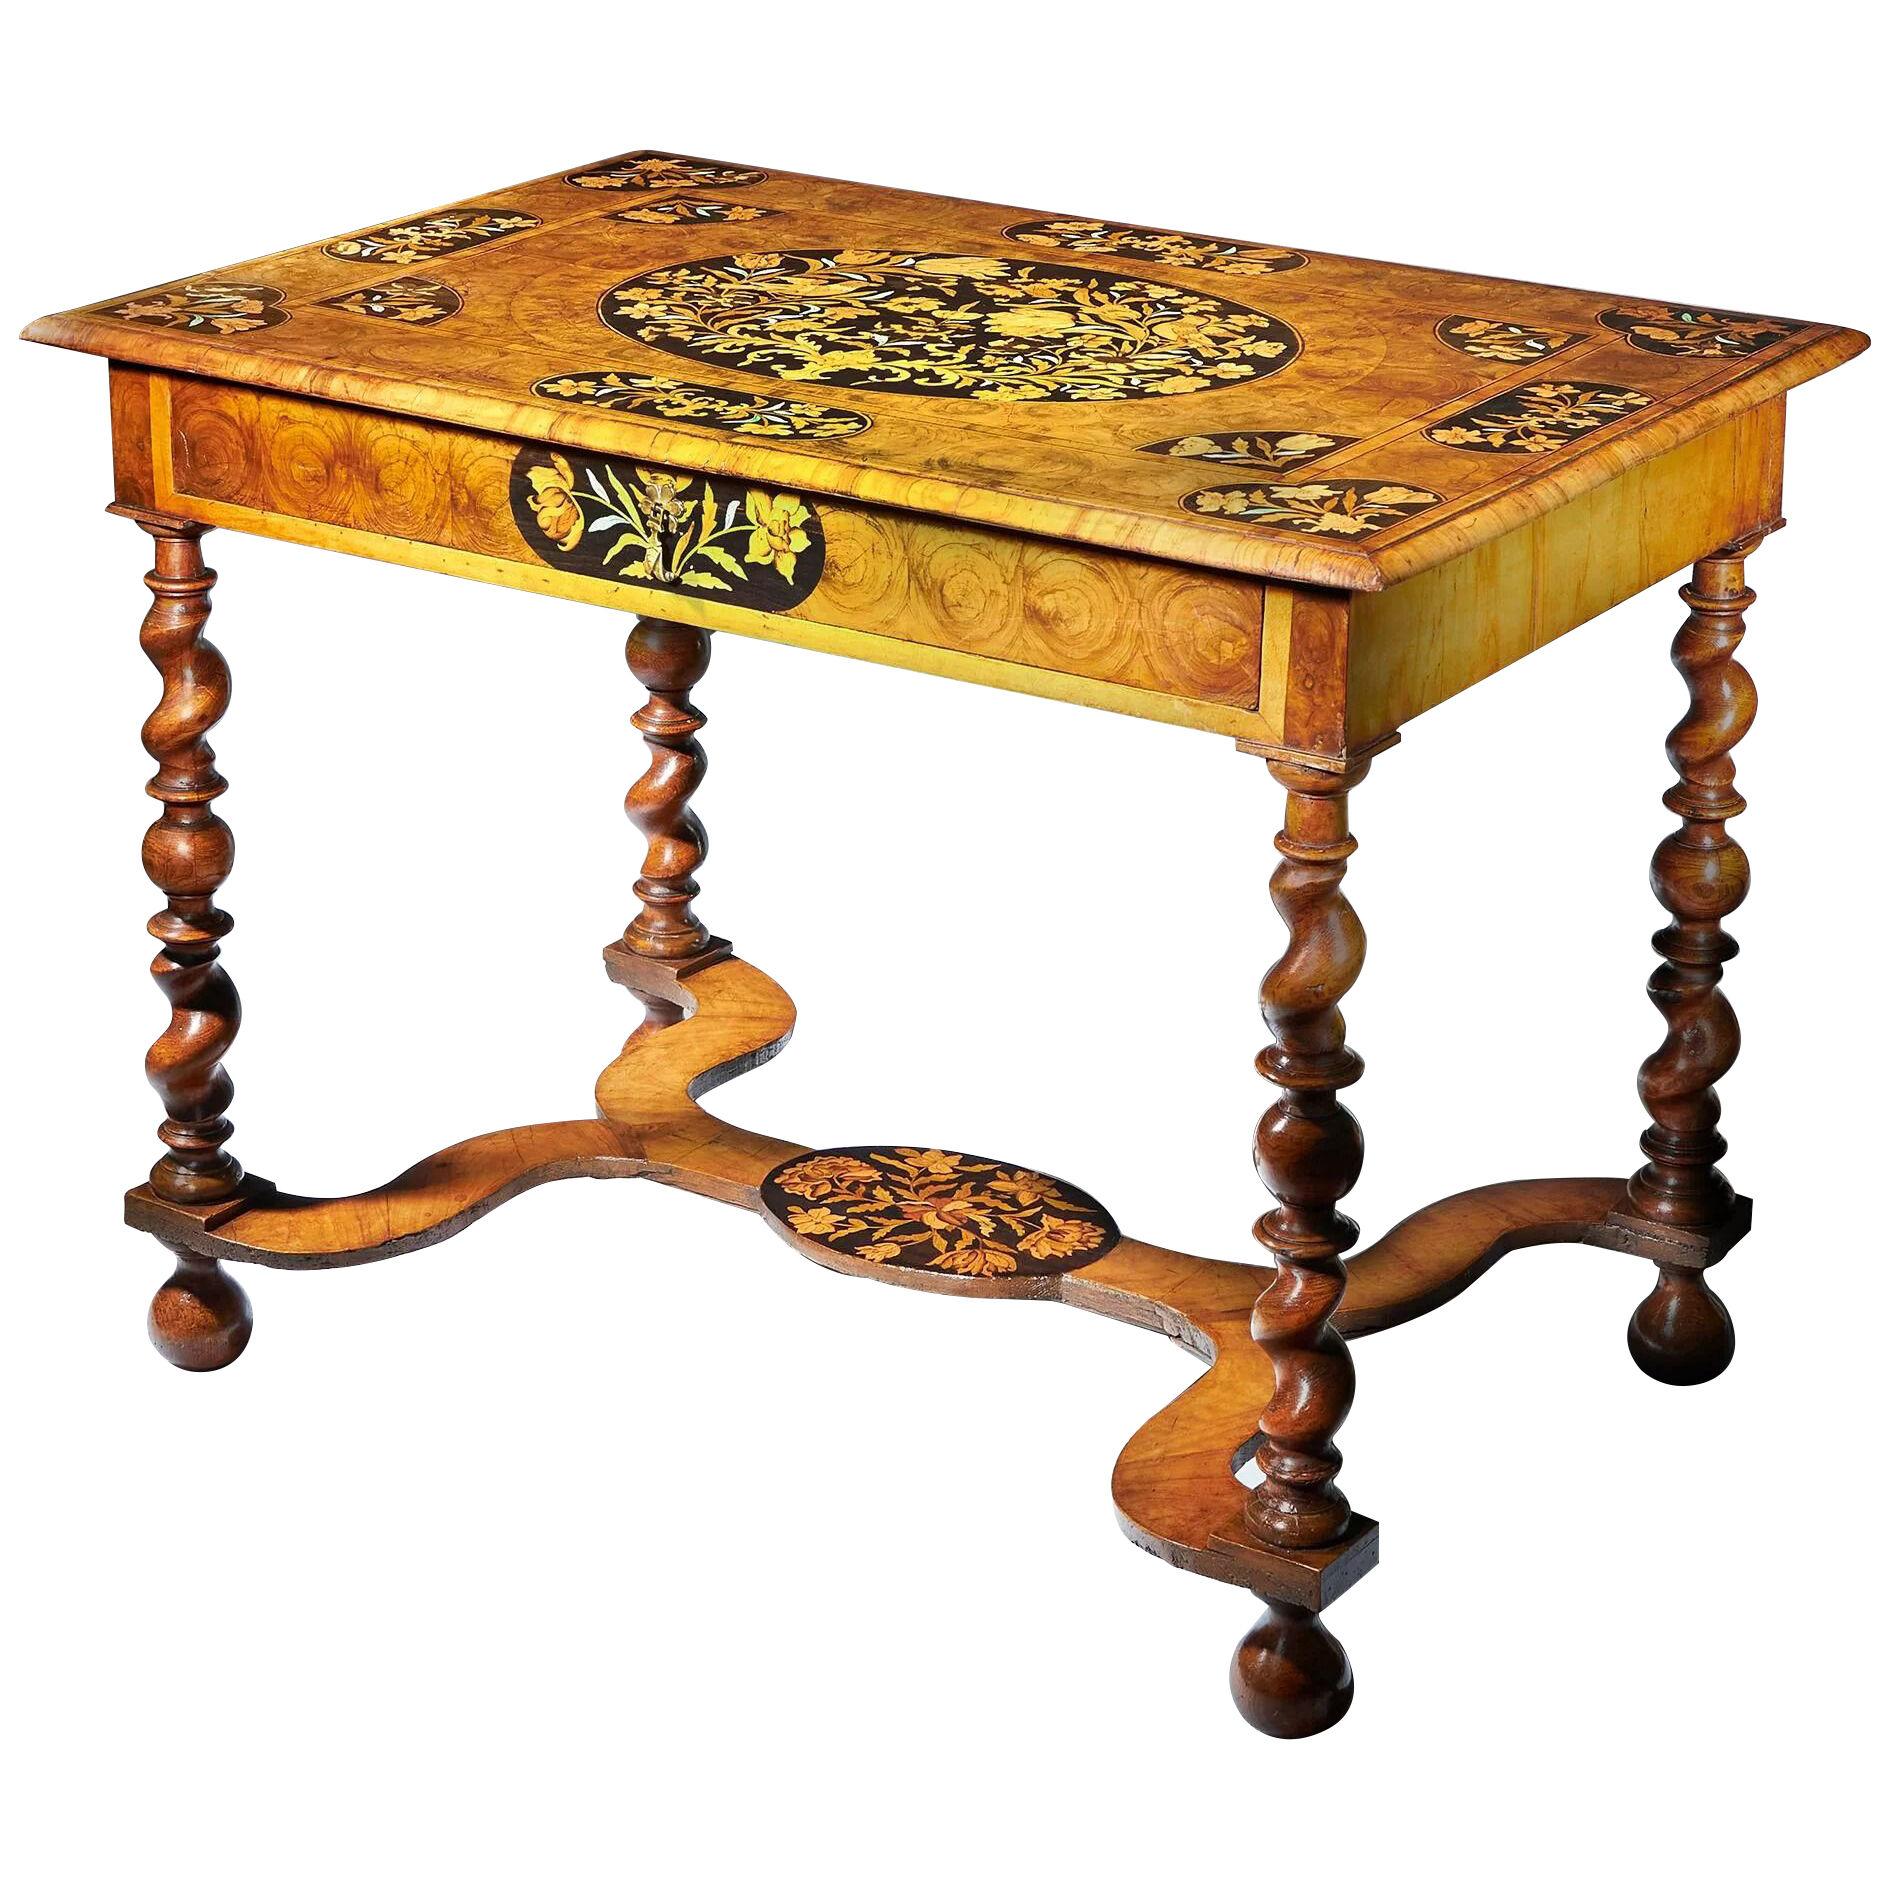 17th Century Charles II Olive Oyster Floral Marquetry Table, Circa 1680-1690